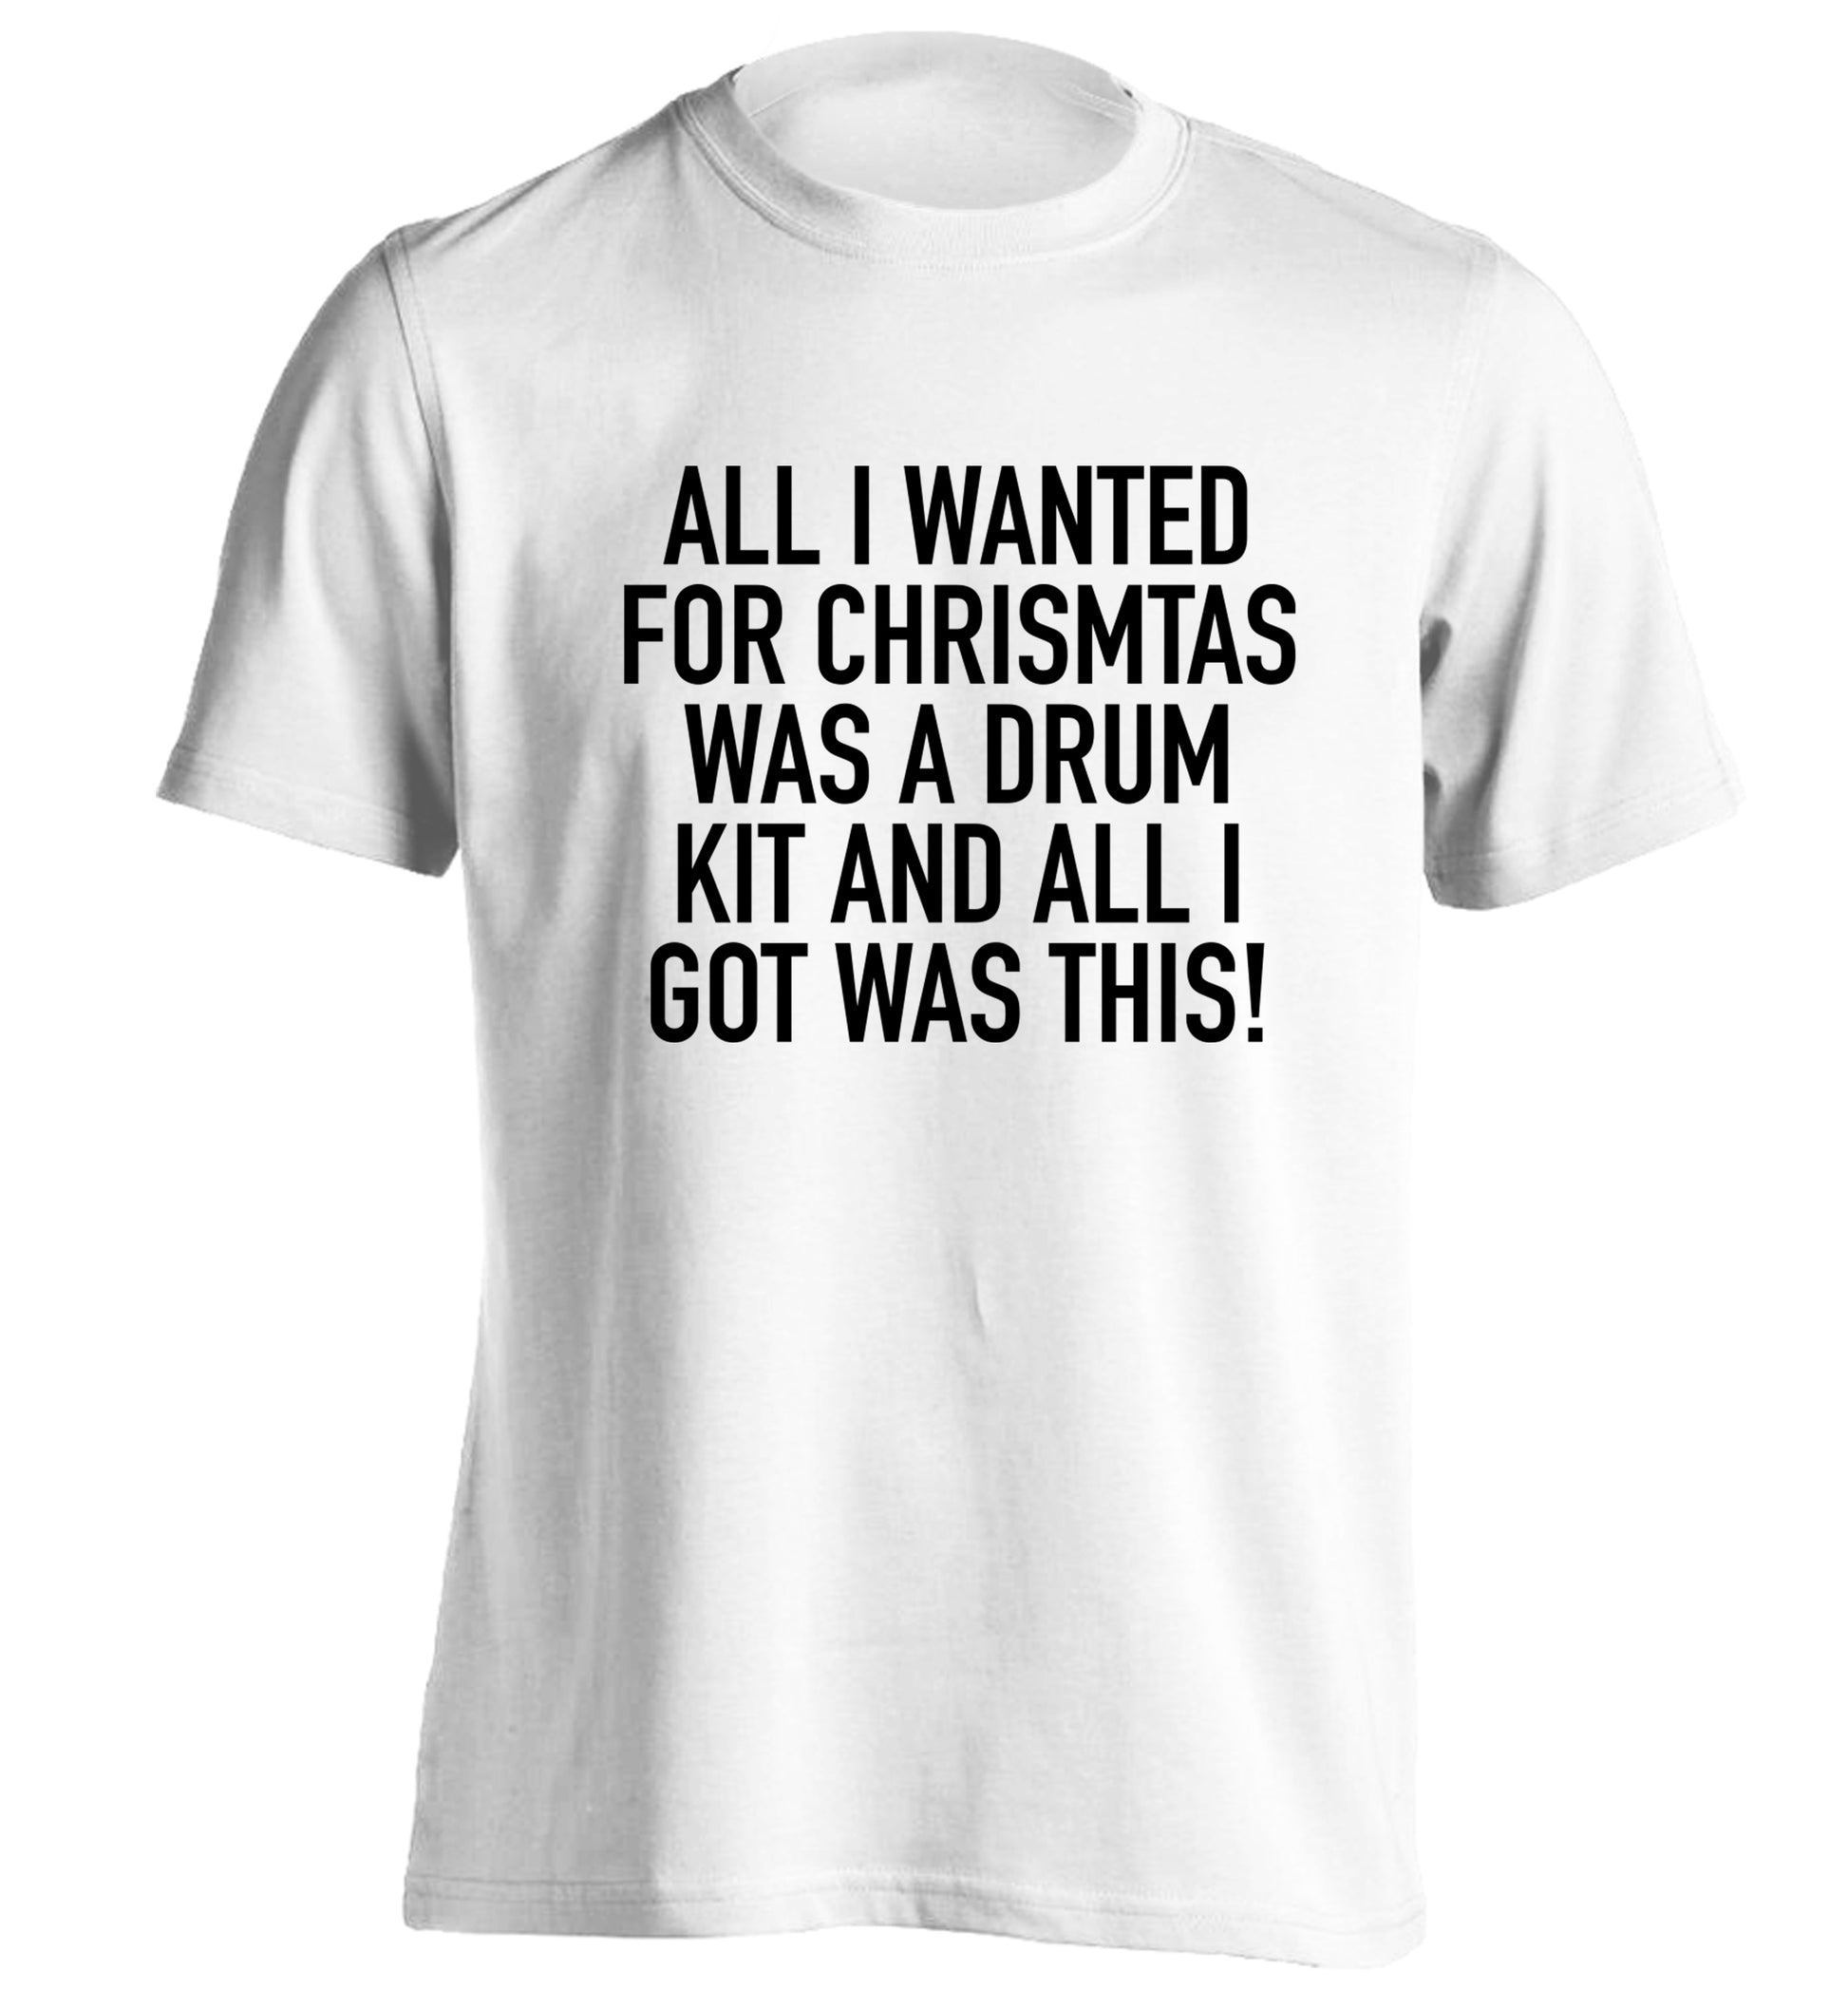 All I wanted for Christmas was a drum kit and all I got was this! adults unisex white Tshirt 2XL